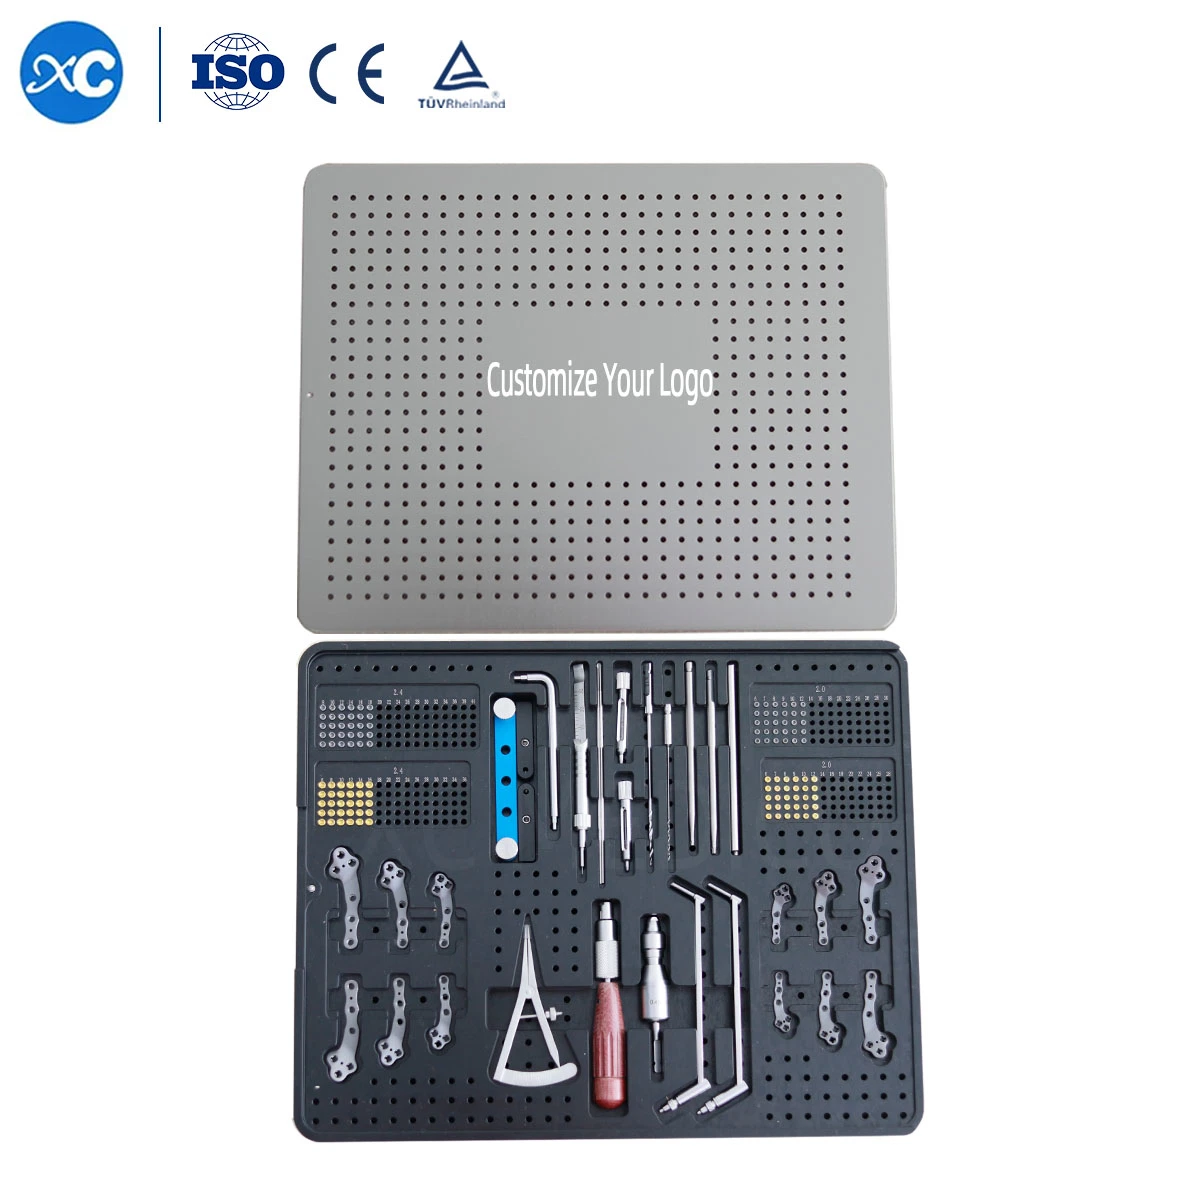 Veterinary Orthopedic Implants Tplo Locking Plates Screws and Instruments Set for Tplo System